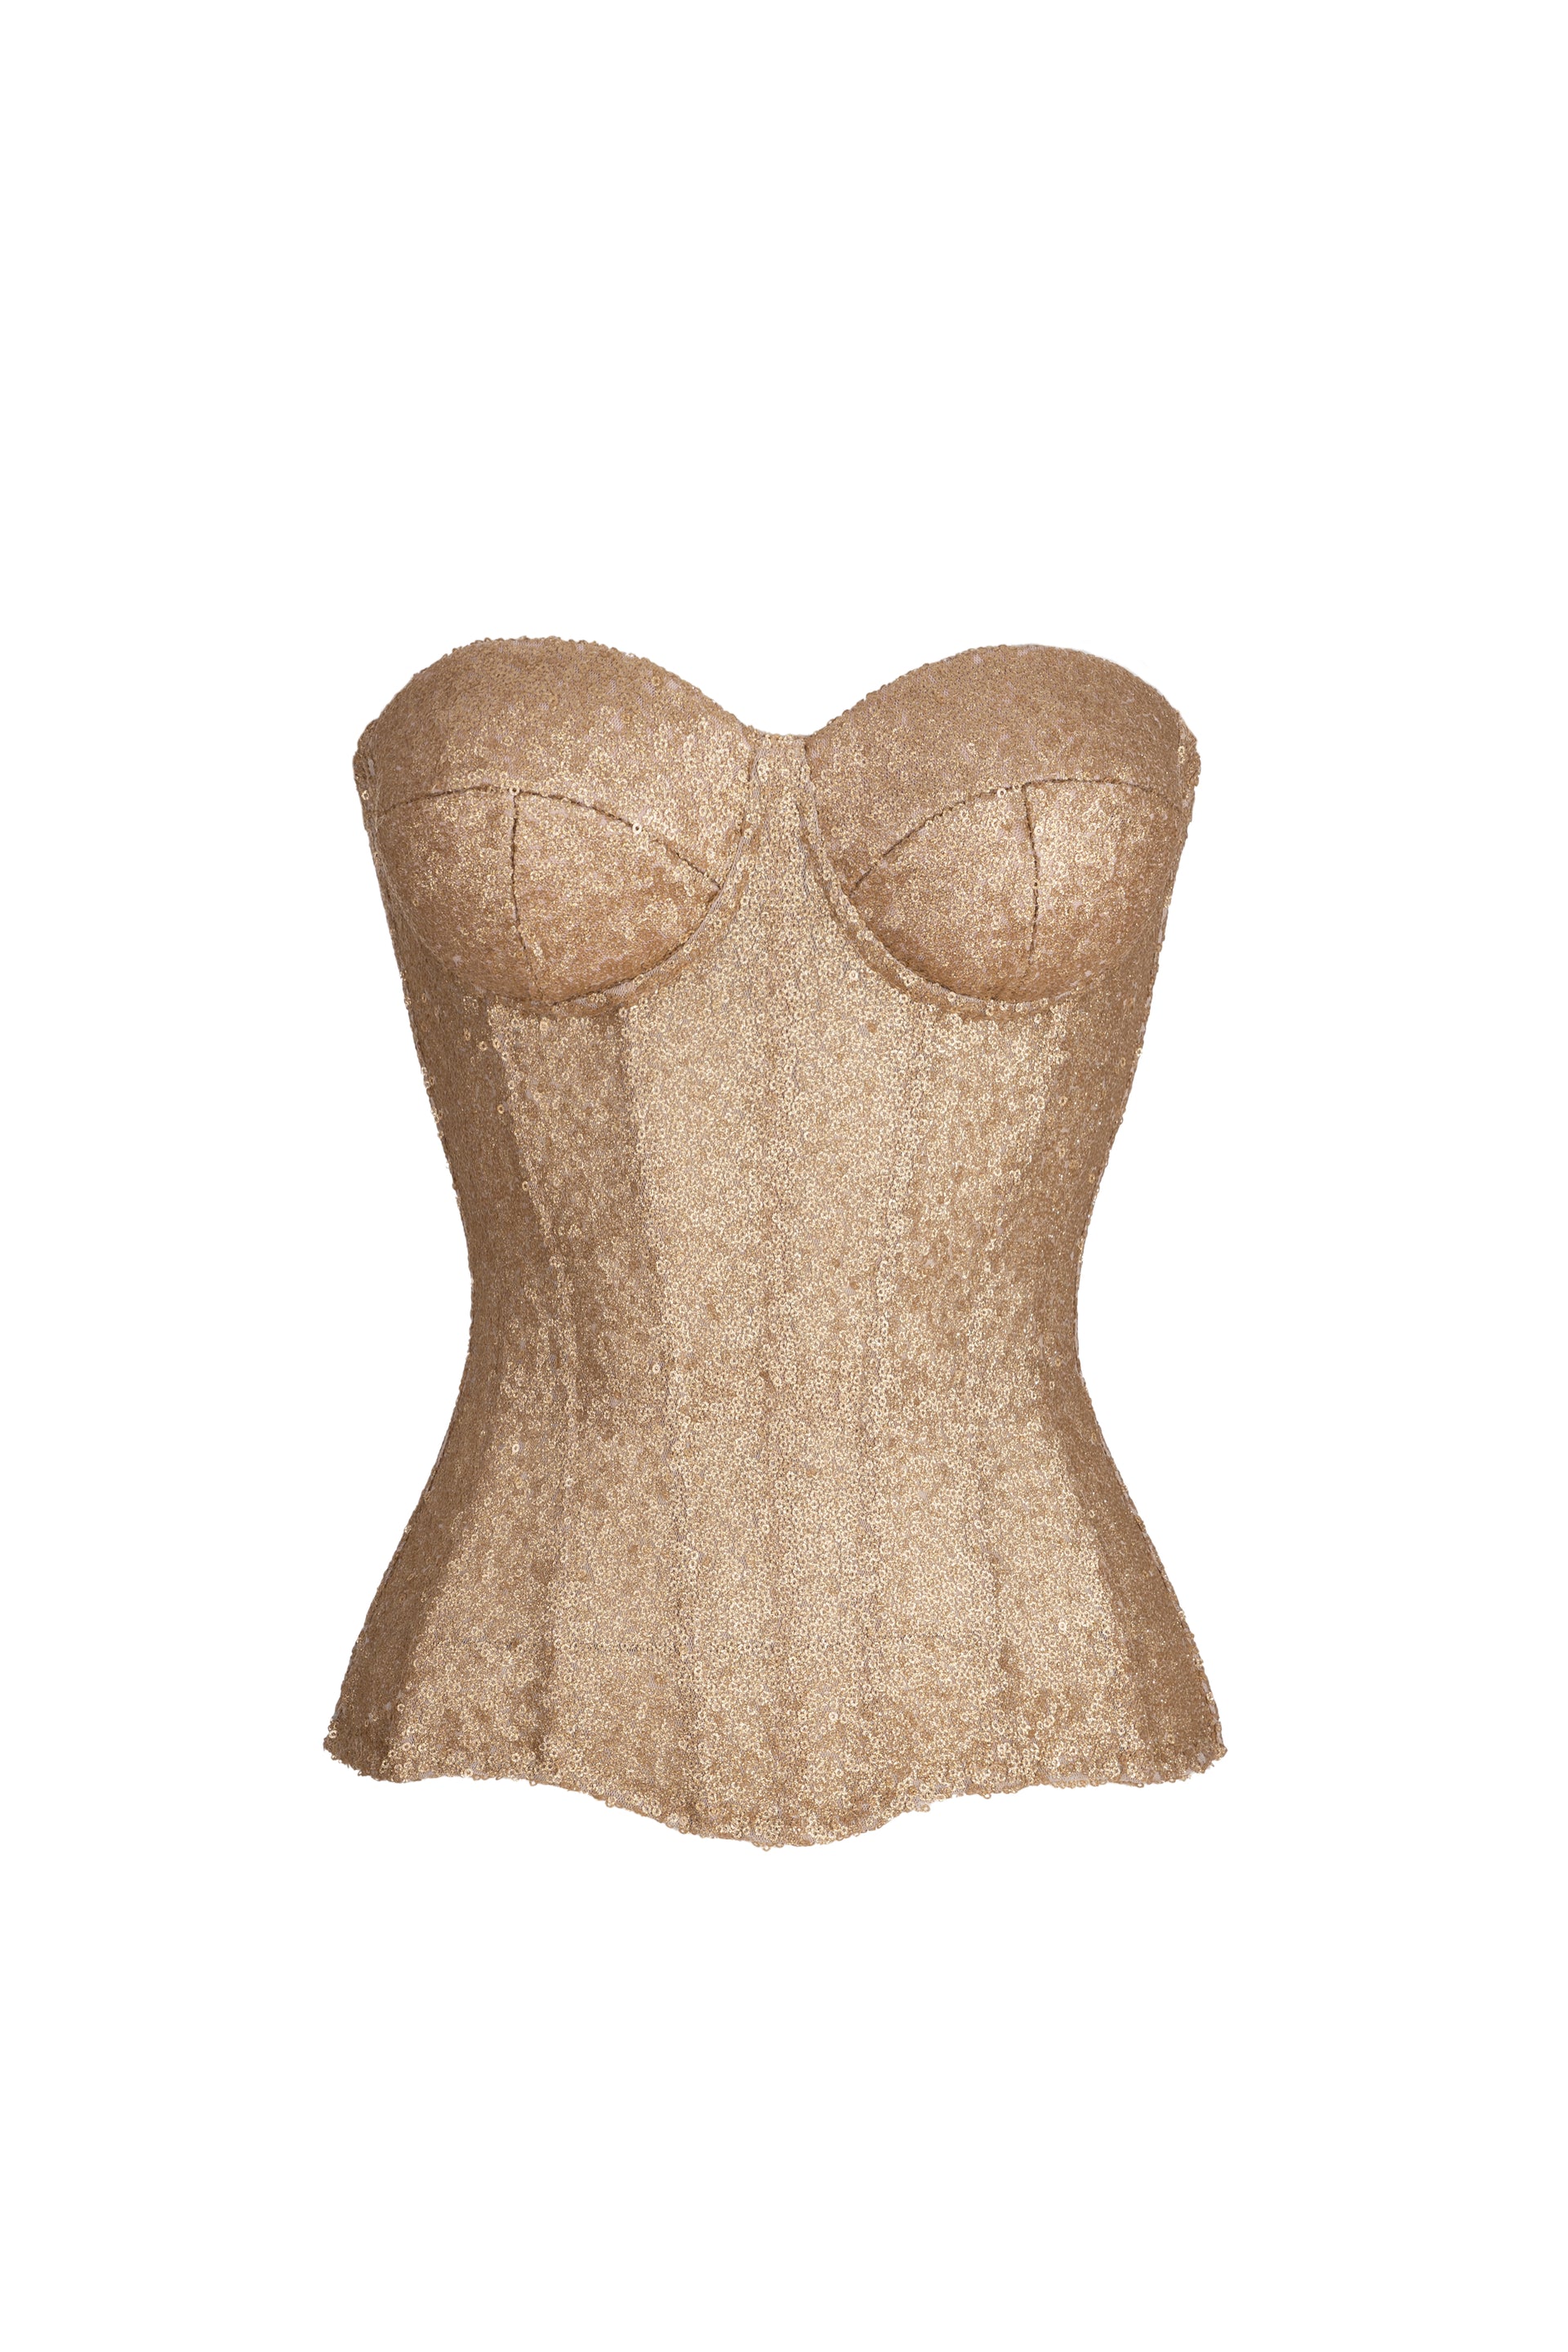 Gold sequined corset with cups